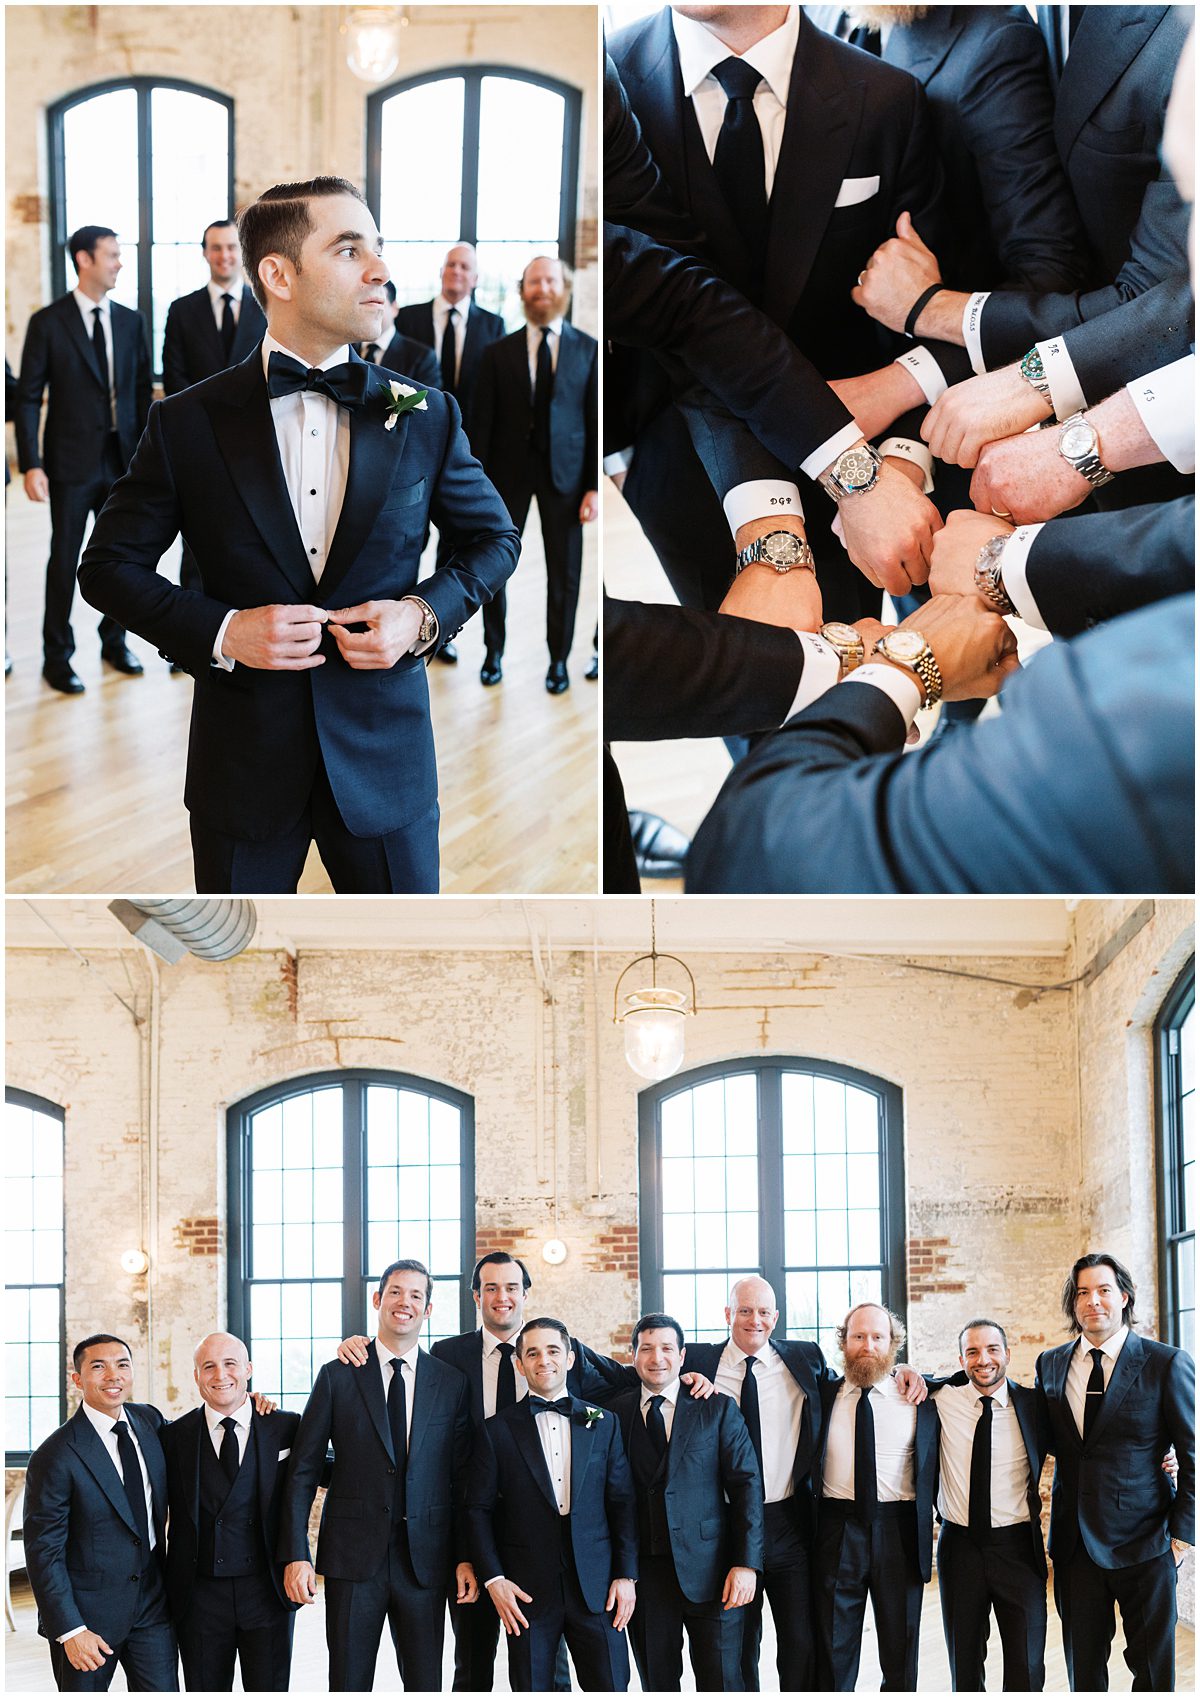 Groom and groomsmen have their initials embroidered on their sleeve cuffs